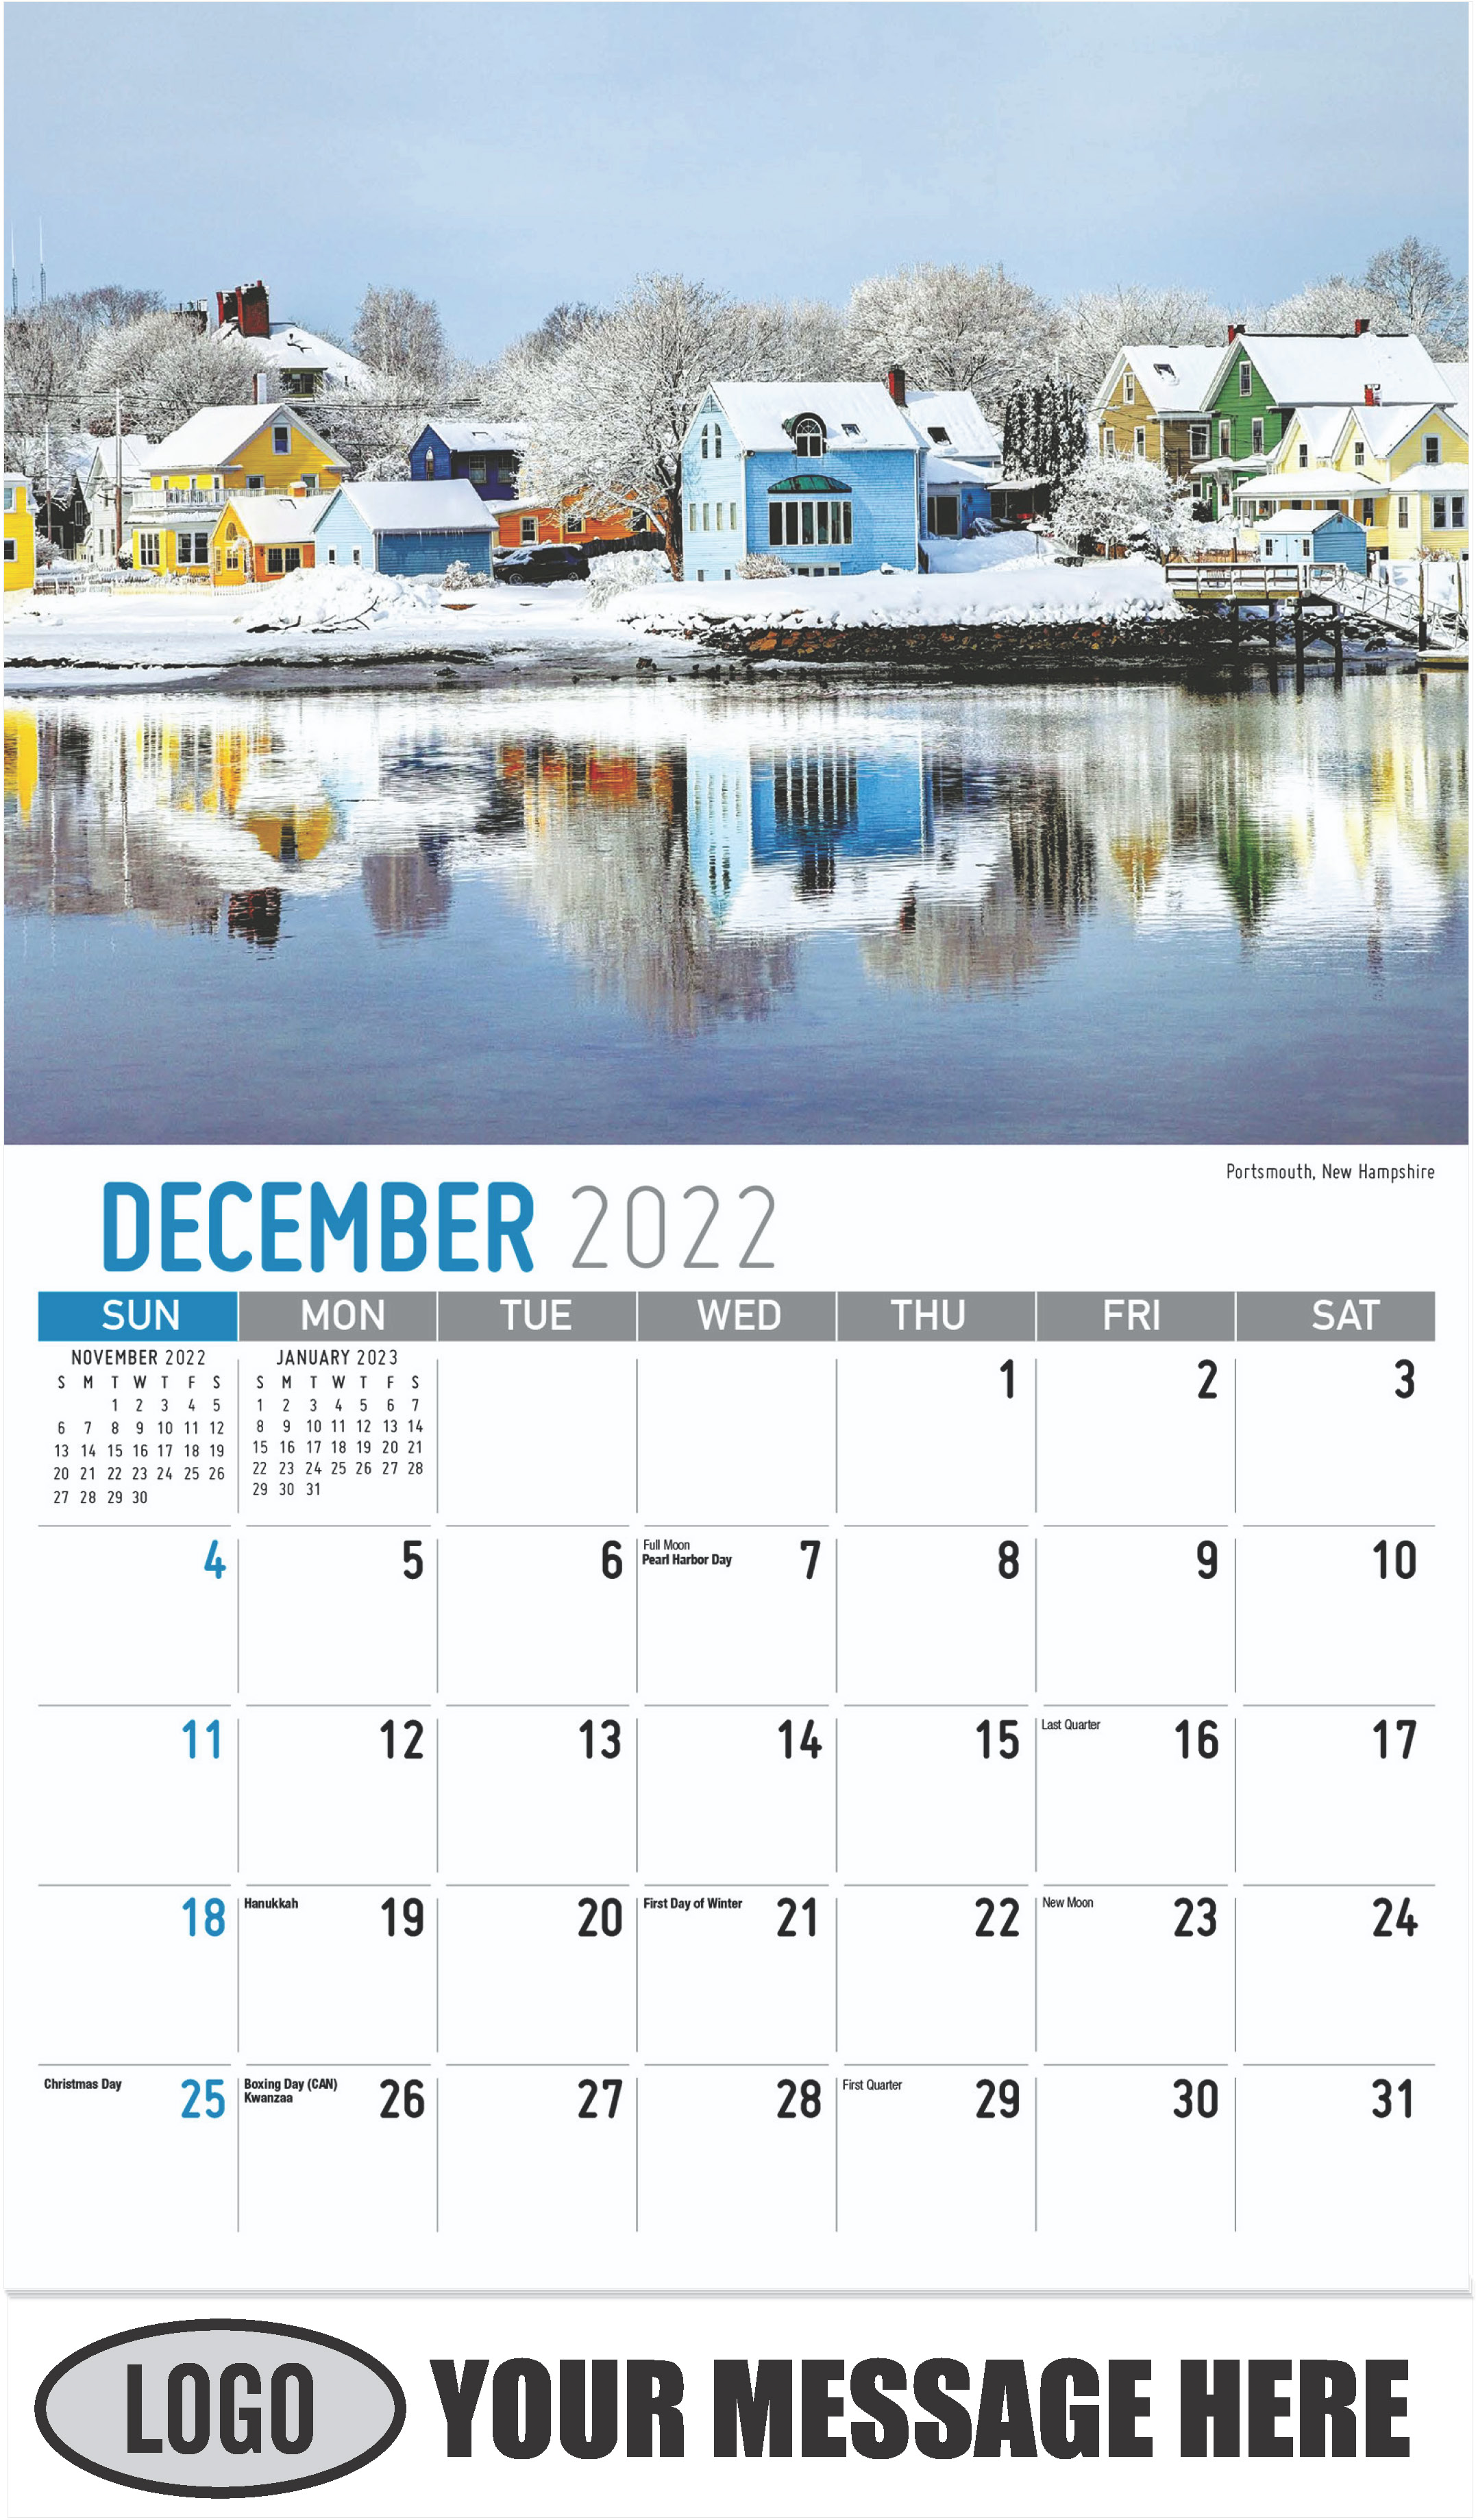 Portsmouth, New Hampshire - December 2022 - Scenes of New England 2023 Promotional Calendar